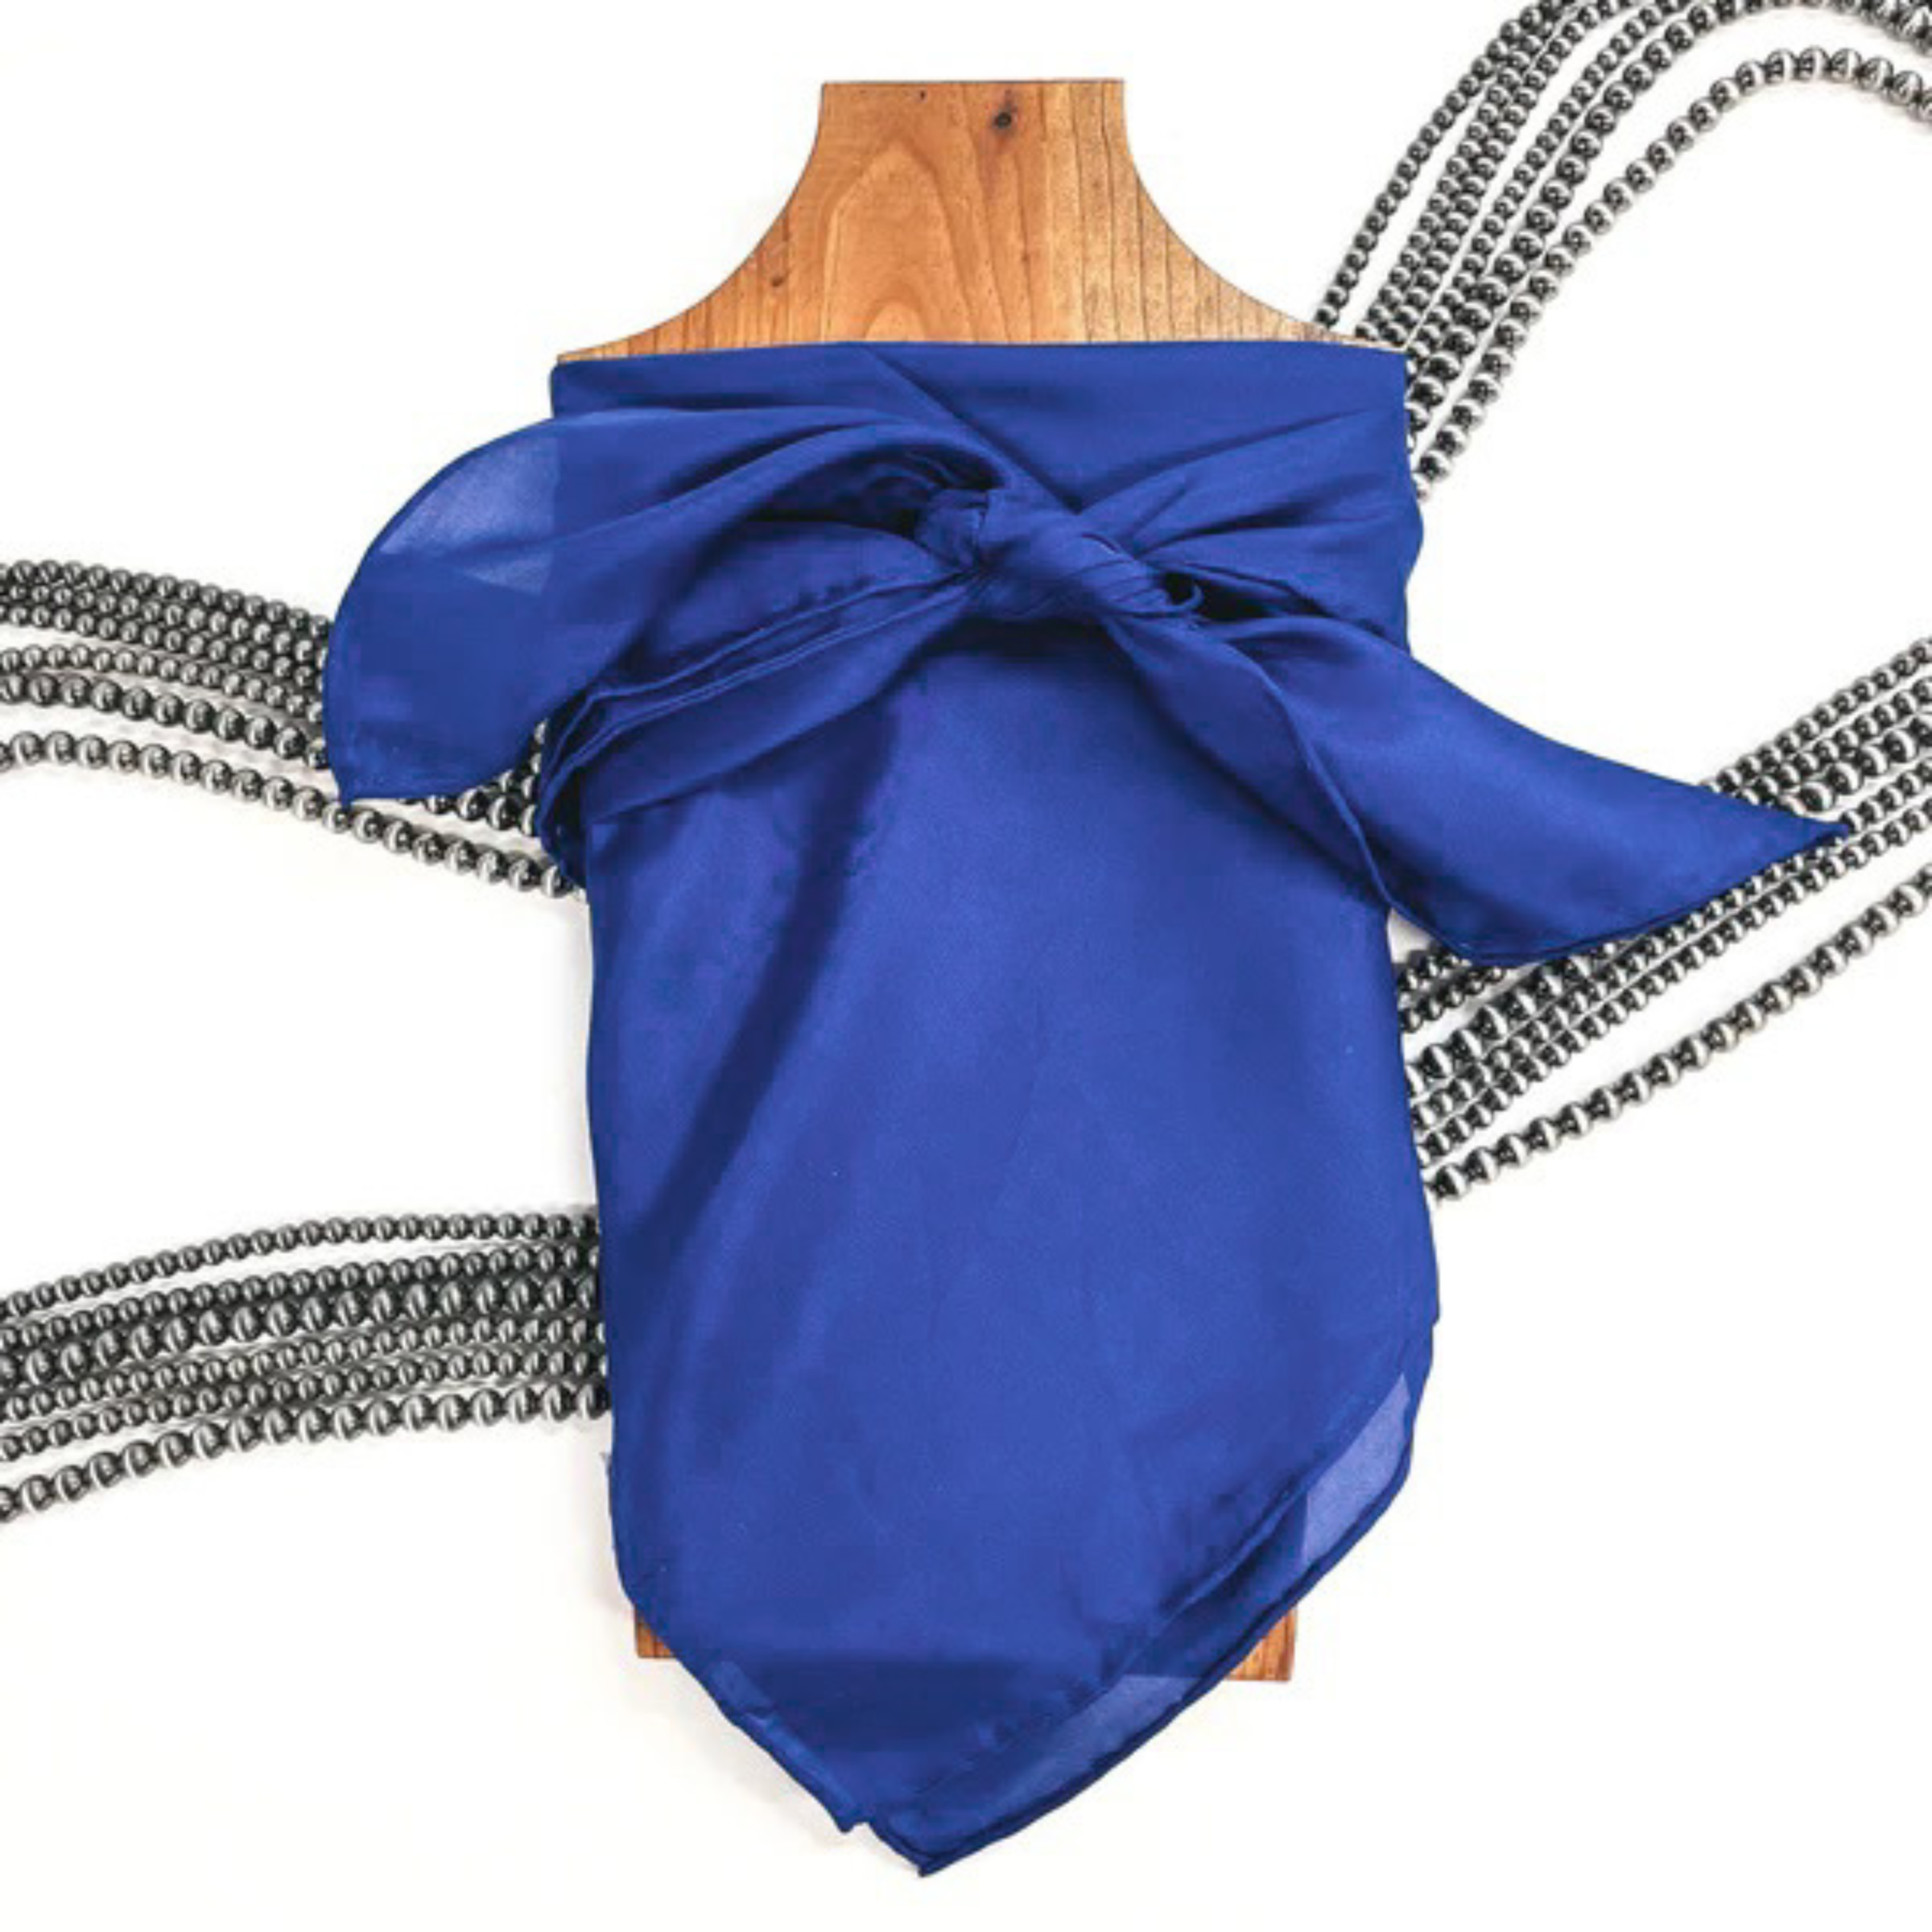 This is a royal blue silk wild rag, this wild rag is placed on a brown necklace board. This wild rag is taken on a white background and with silver Navajo pearls in the back as decor.